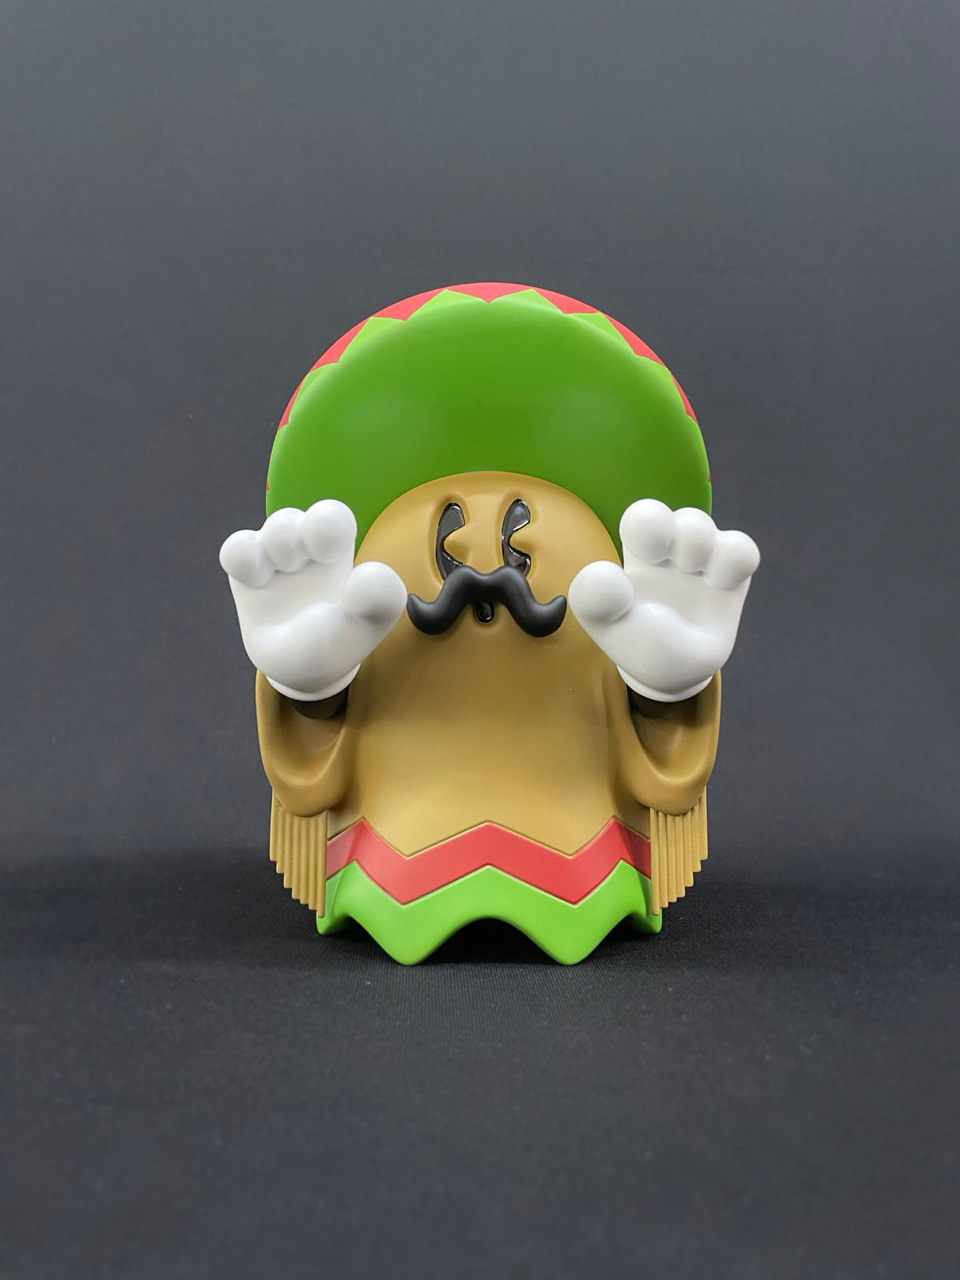 art arttoy artwork collect Collection designertoy Interior interiorarttoy interiortoy kidult modeling toy